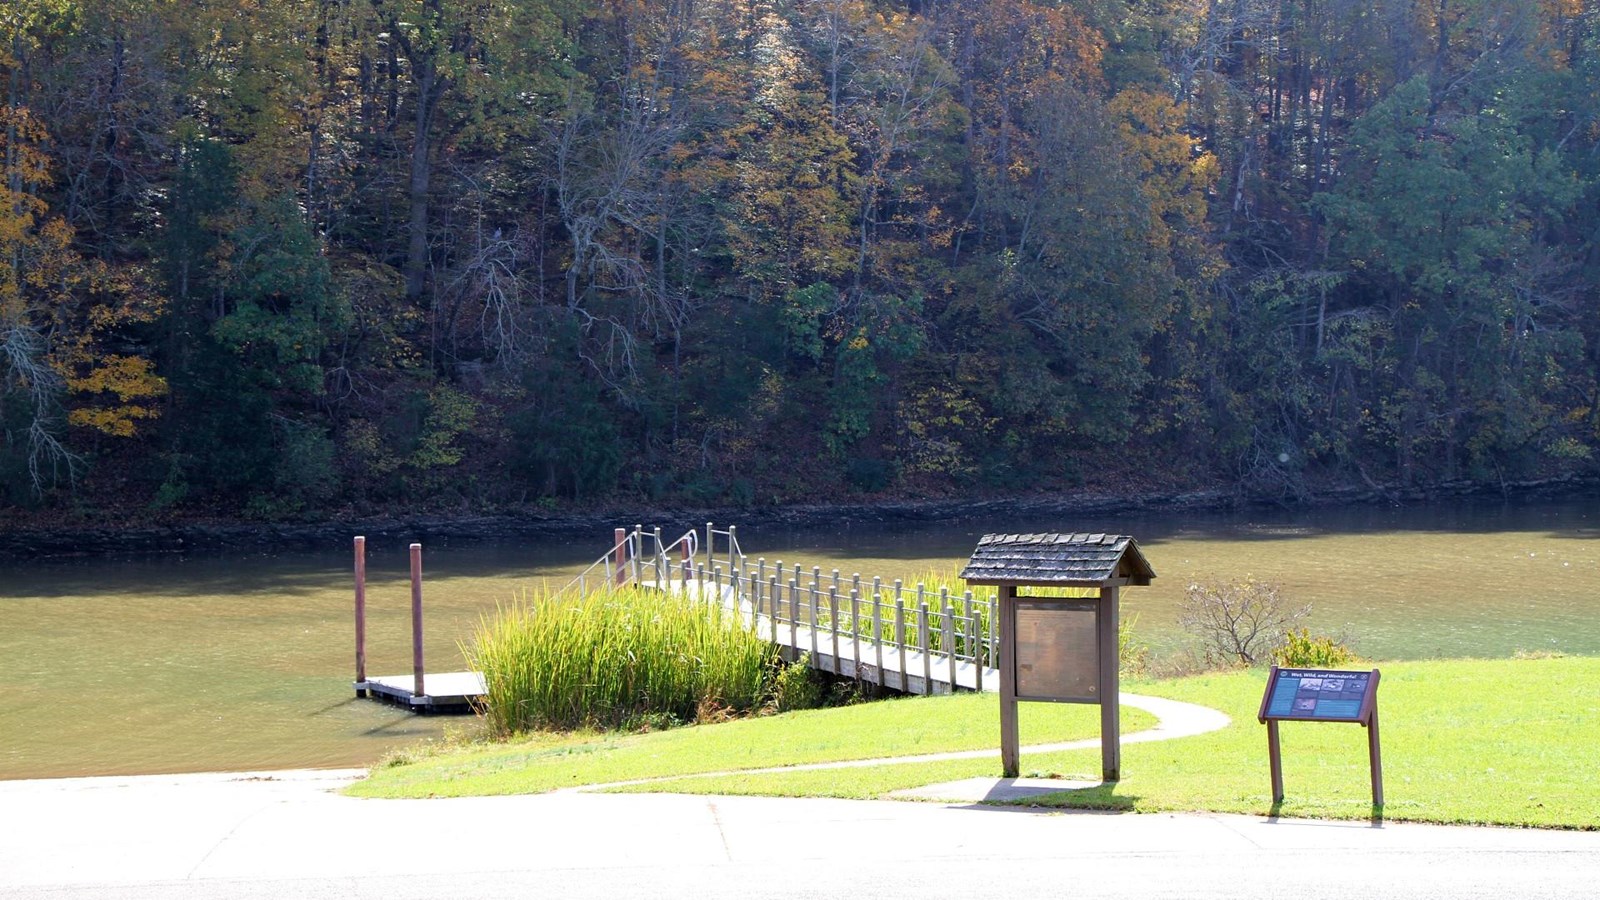 A dock sits in some water, a ramp to the left to deposit boats, 2 informational signs near road